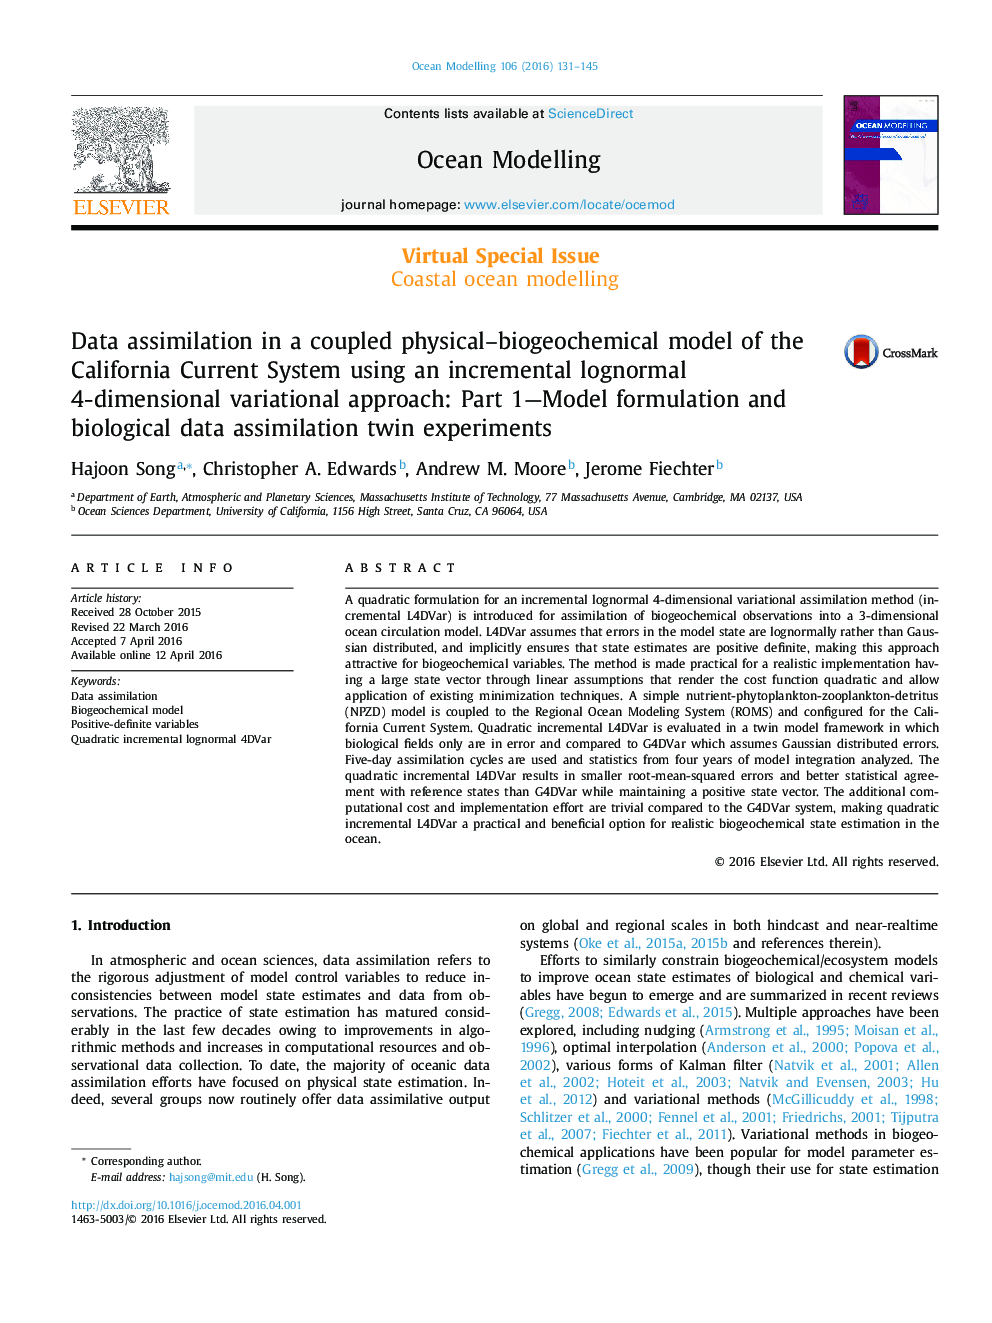 Data assimilation in a coupled physical–biogeochemical model of the California Current System using an incremental lognormal 4-dimensional variational approach: Part 1—Model formulation and biological data assimilation twin experiments